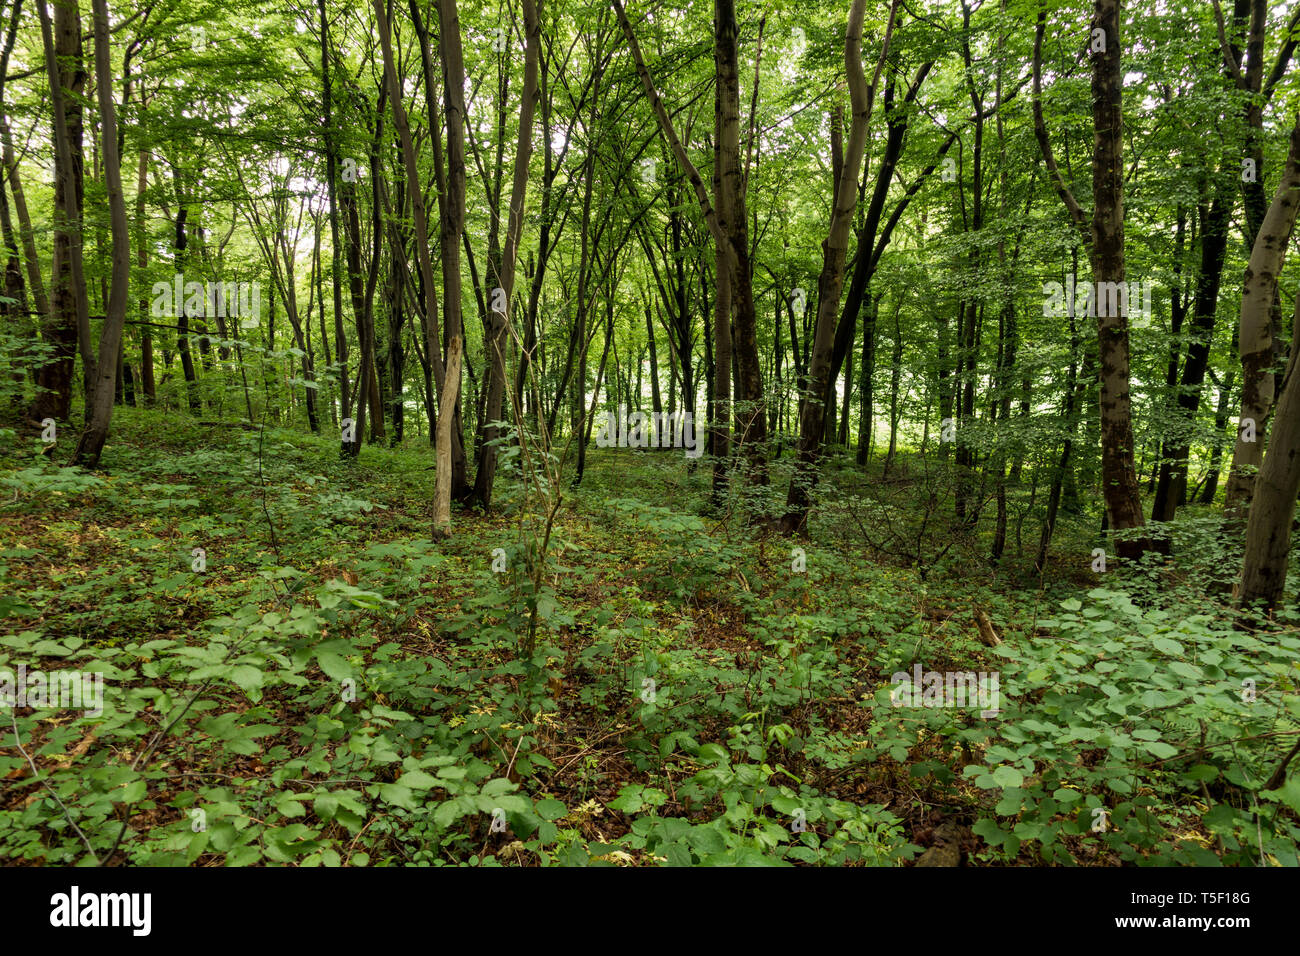 Lush vegetation of temperate deciduous forest in Limburg, South of Netherlands. Stock Photo